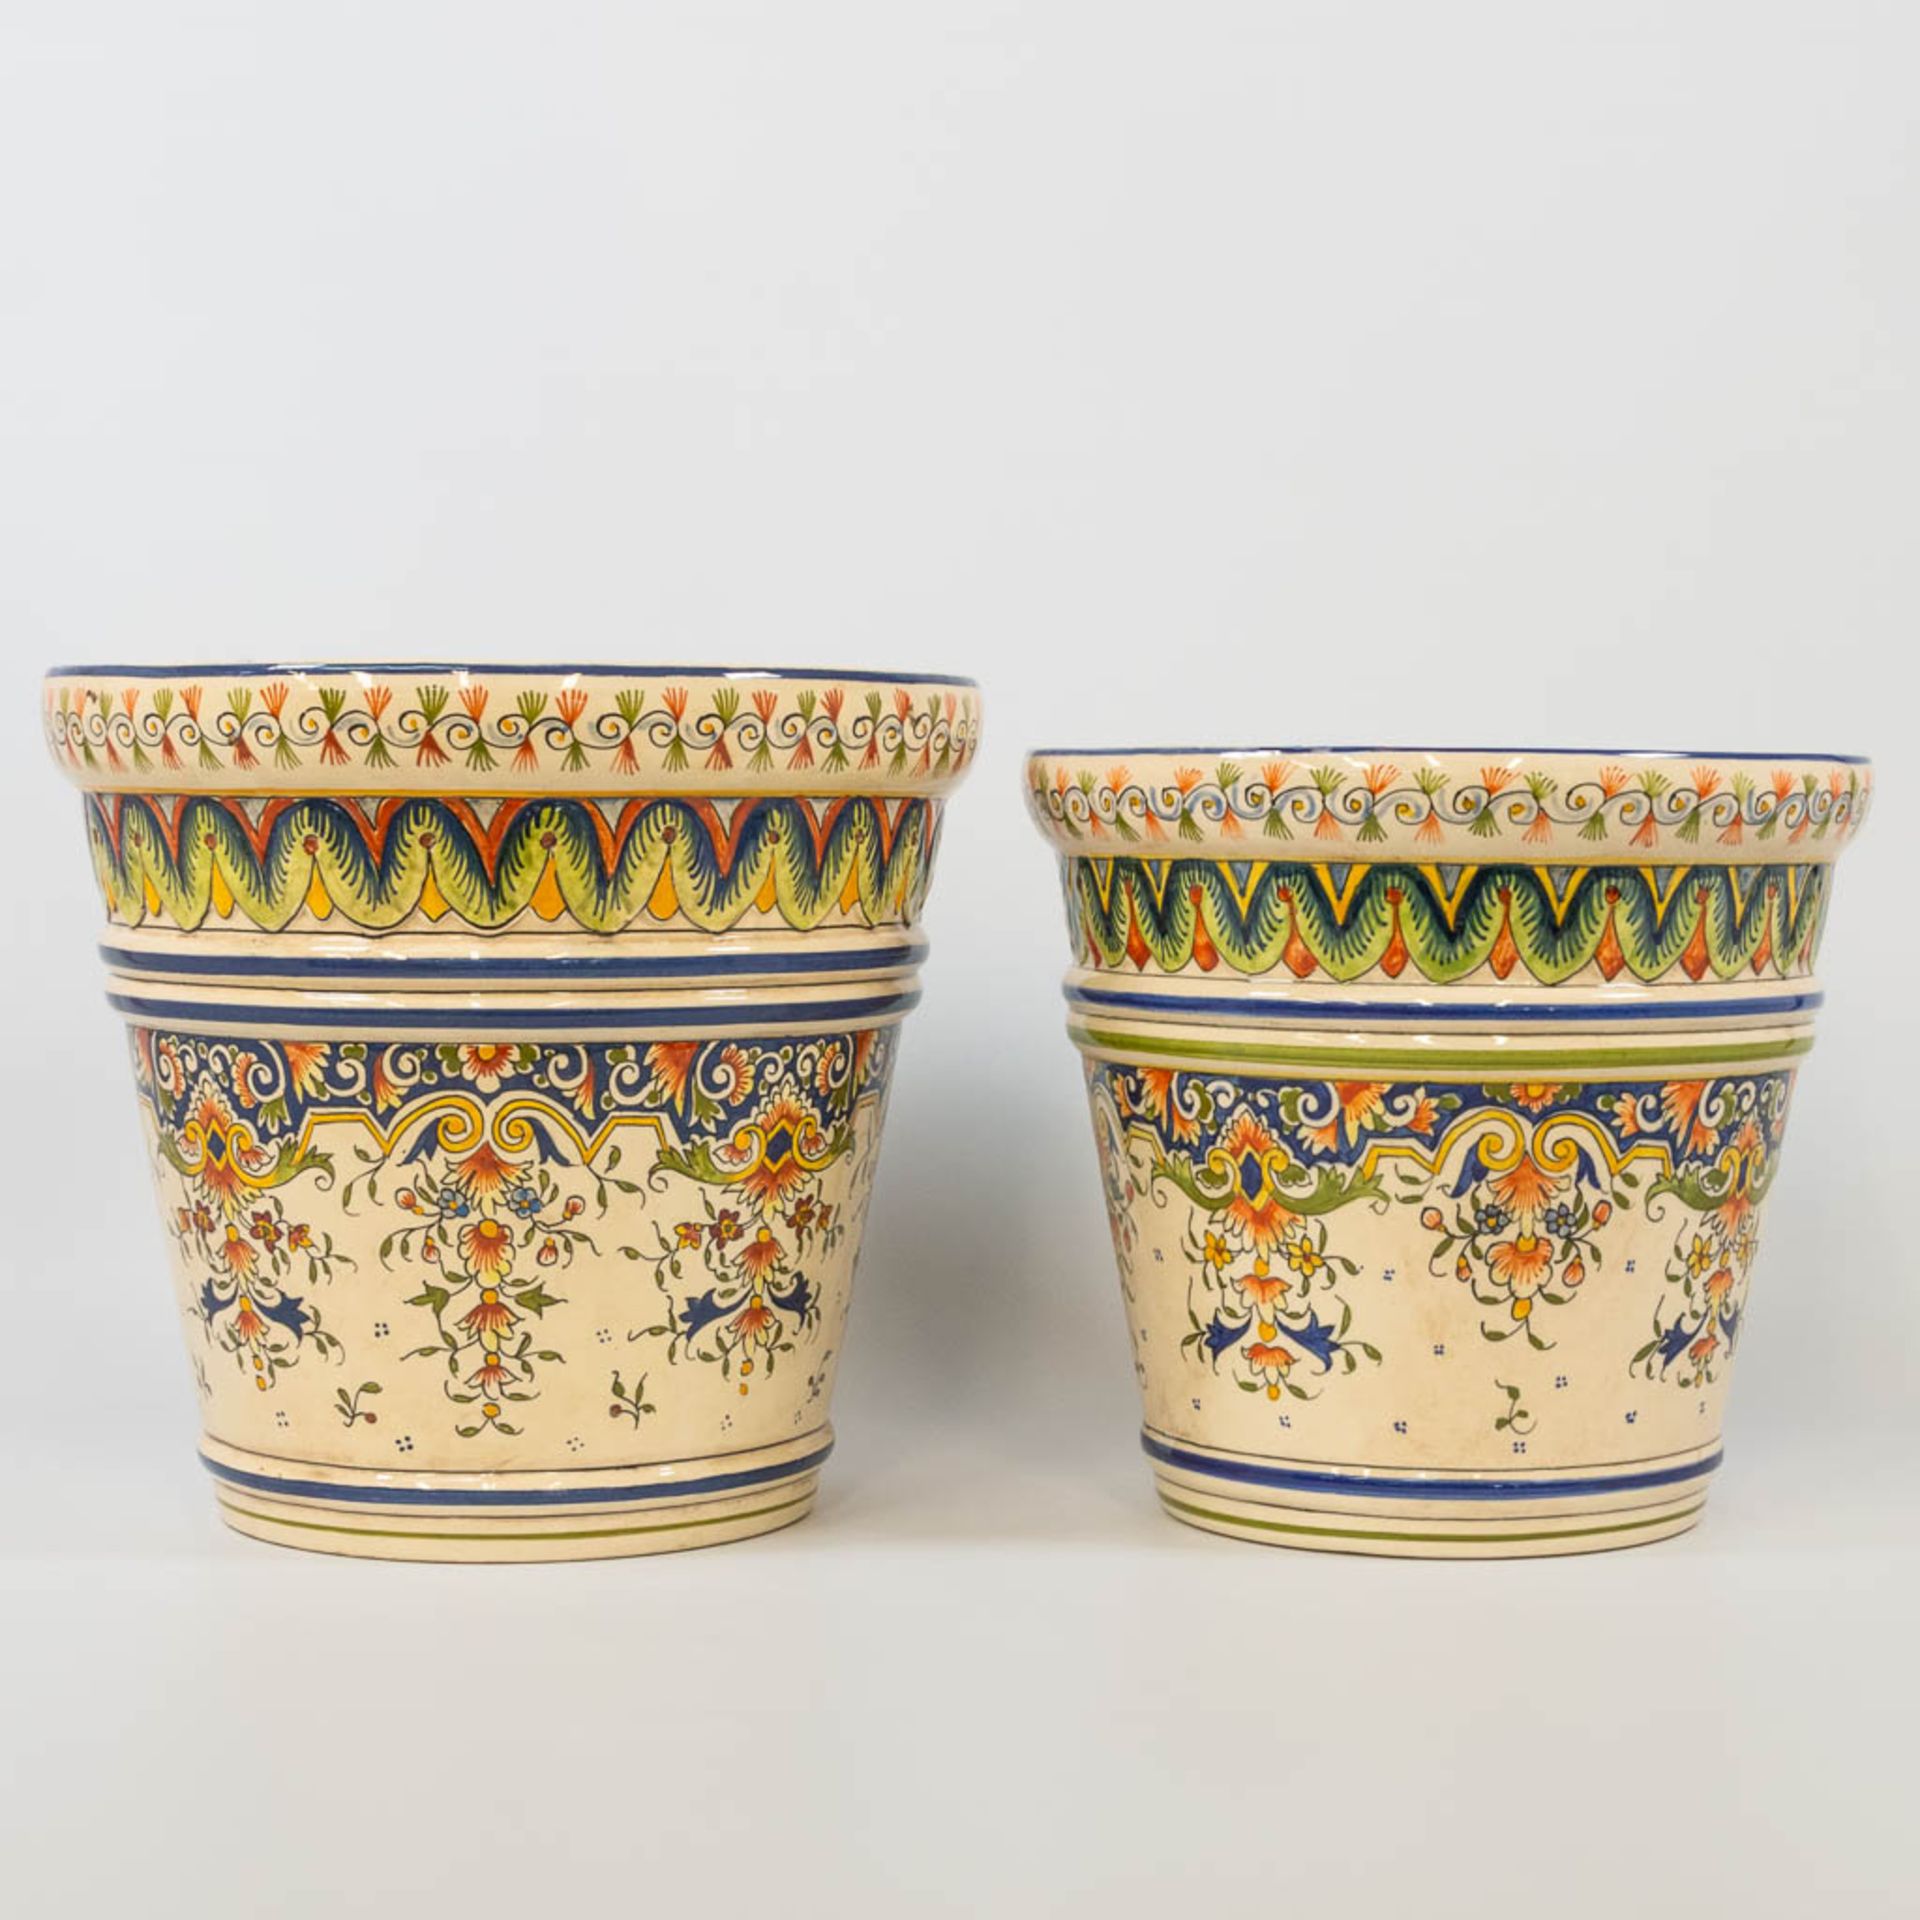 A collection of 2 cache-pots in two sizes with hand-painted decor, made of faience in Rouen, France.